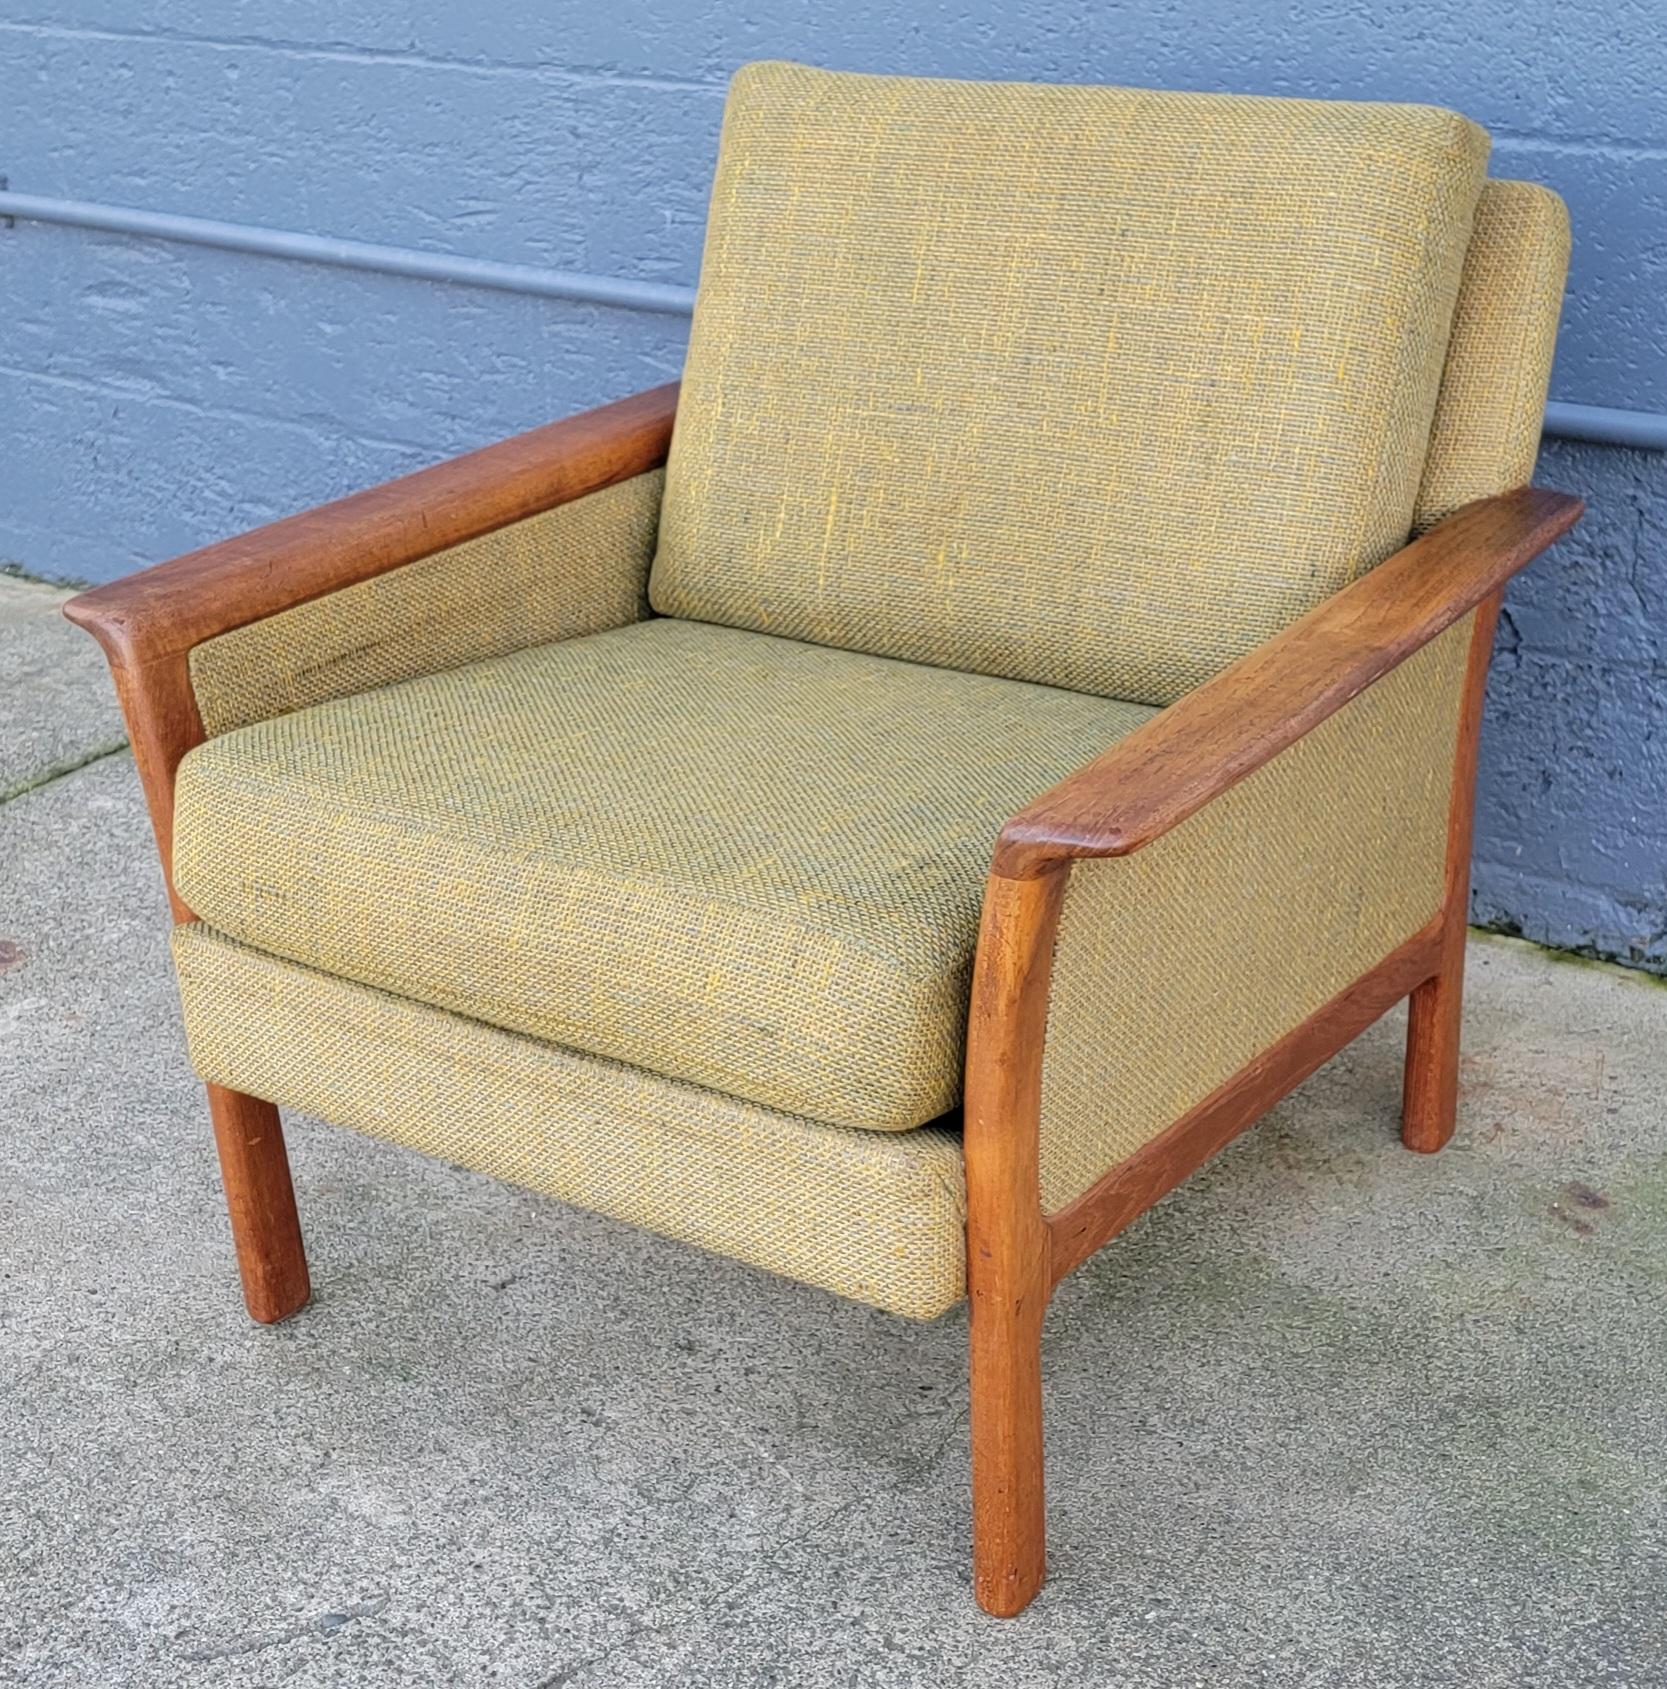 A teak Danish Modern lounge or side chair made by Westnofa of Norway. Circa. 1960's. Solid teak frame featuring sculptural curved arms. Structurally very solid and very comfortable. Retains original finish and upholstery. Condition satisfactory for